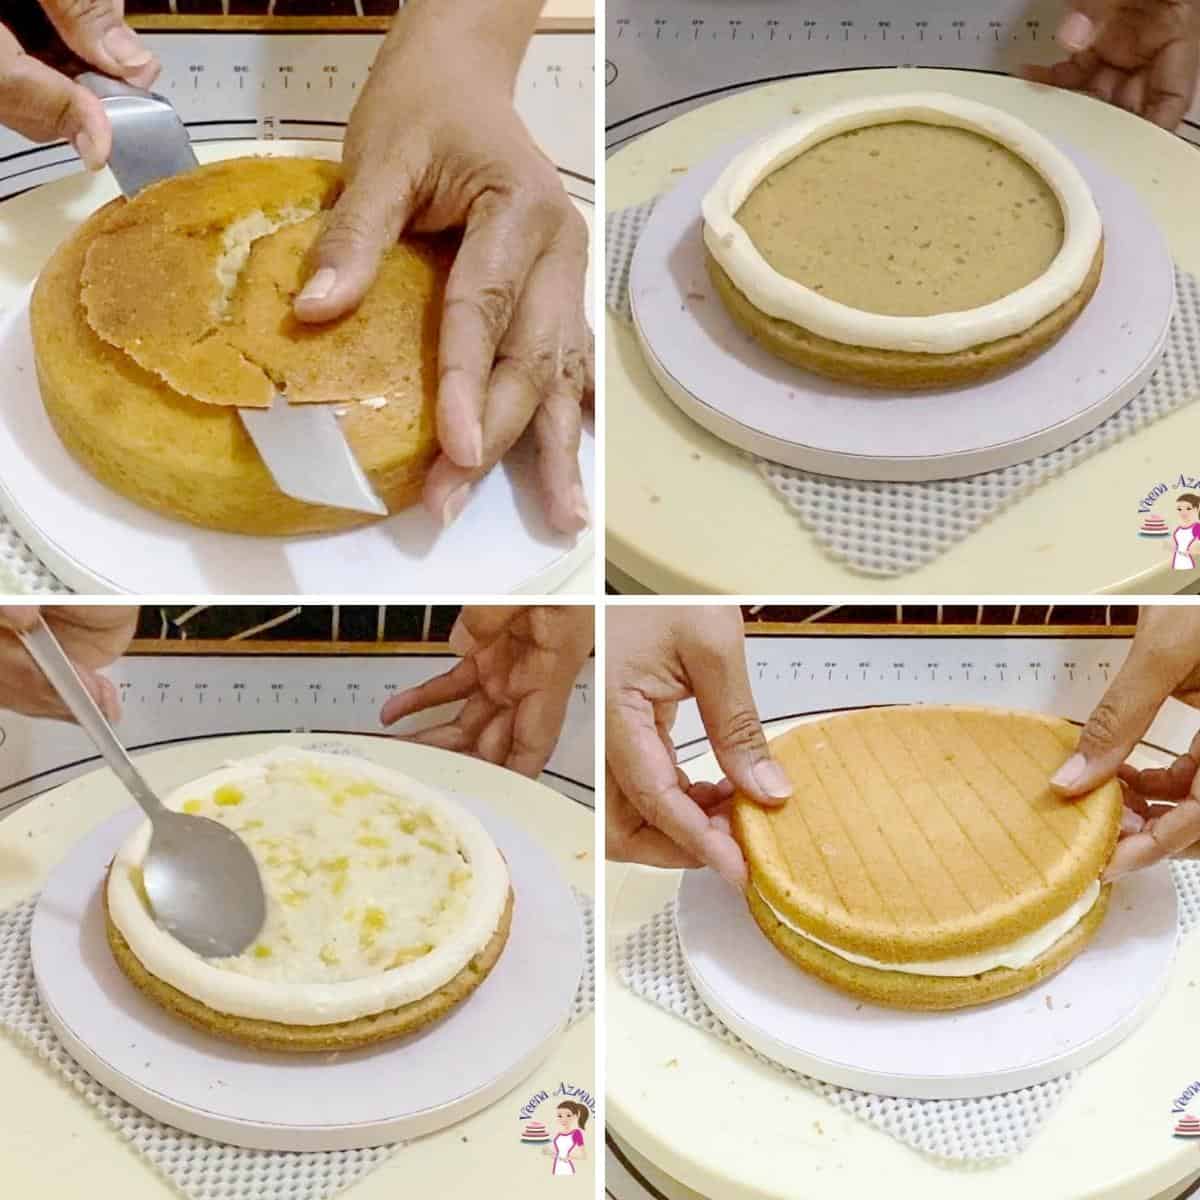 Progress Pictures showing how to fill a cake.